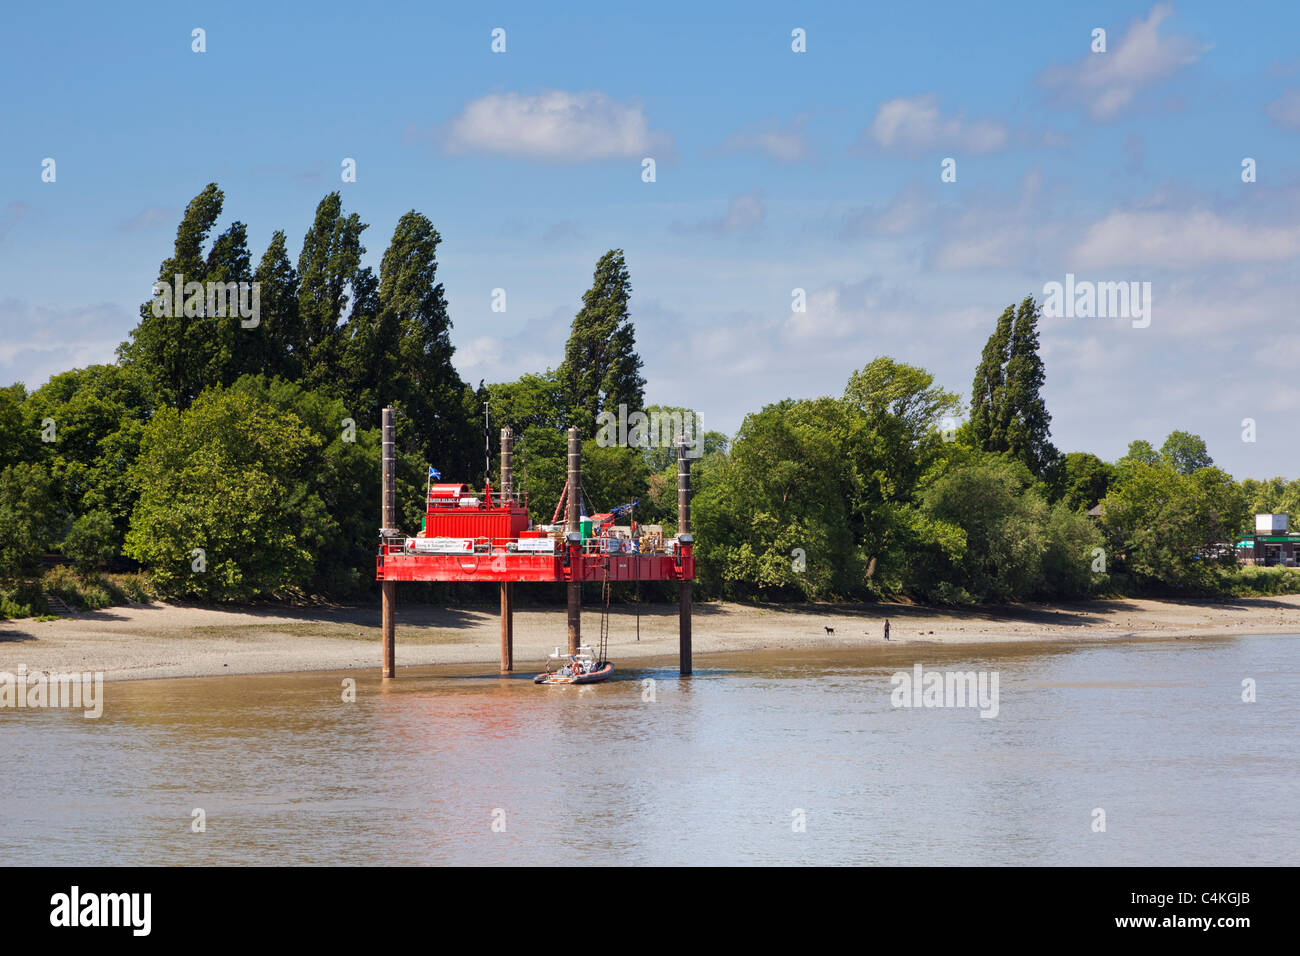 Thames tunnel exploration drilling rig, River Thames, London, England UK Stock Photo